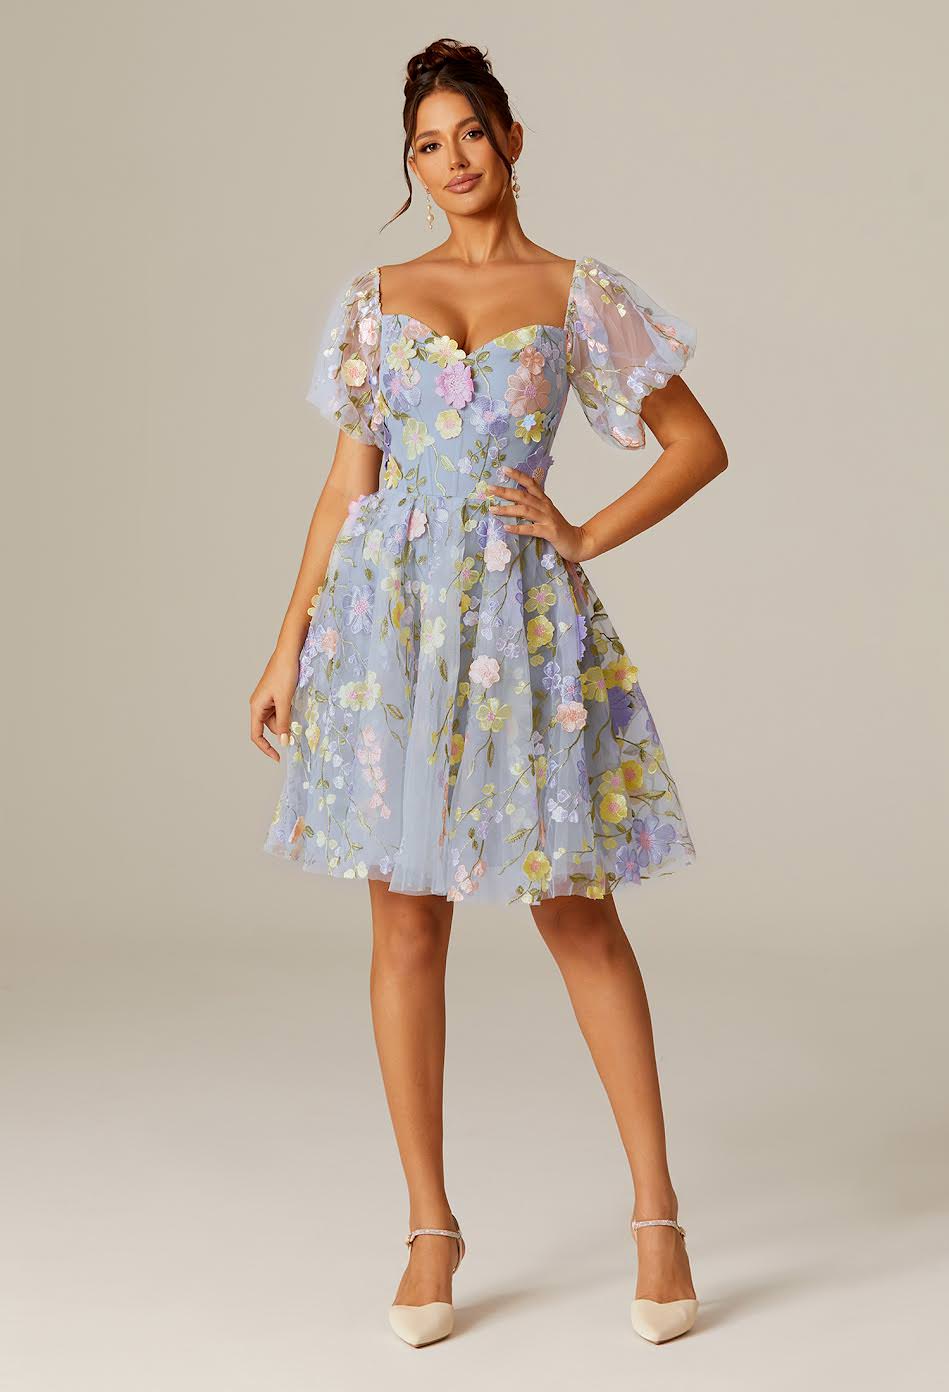 Short blue Floral dress by AW Bridal 